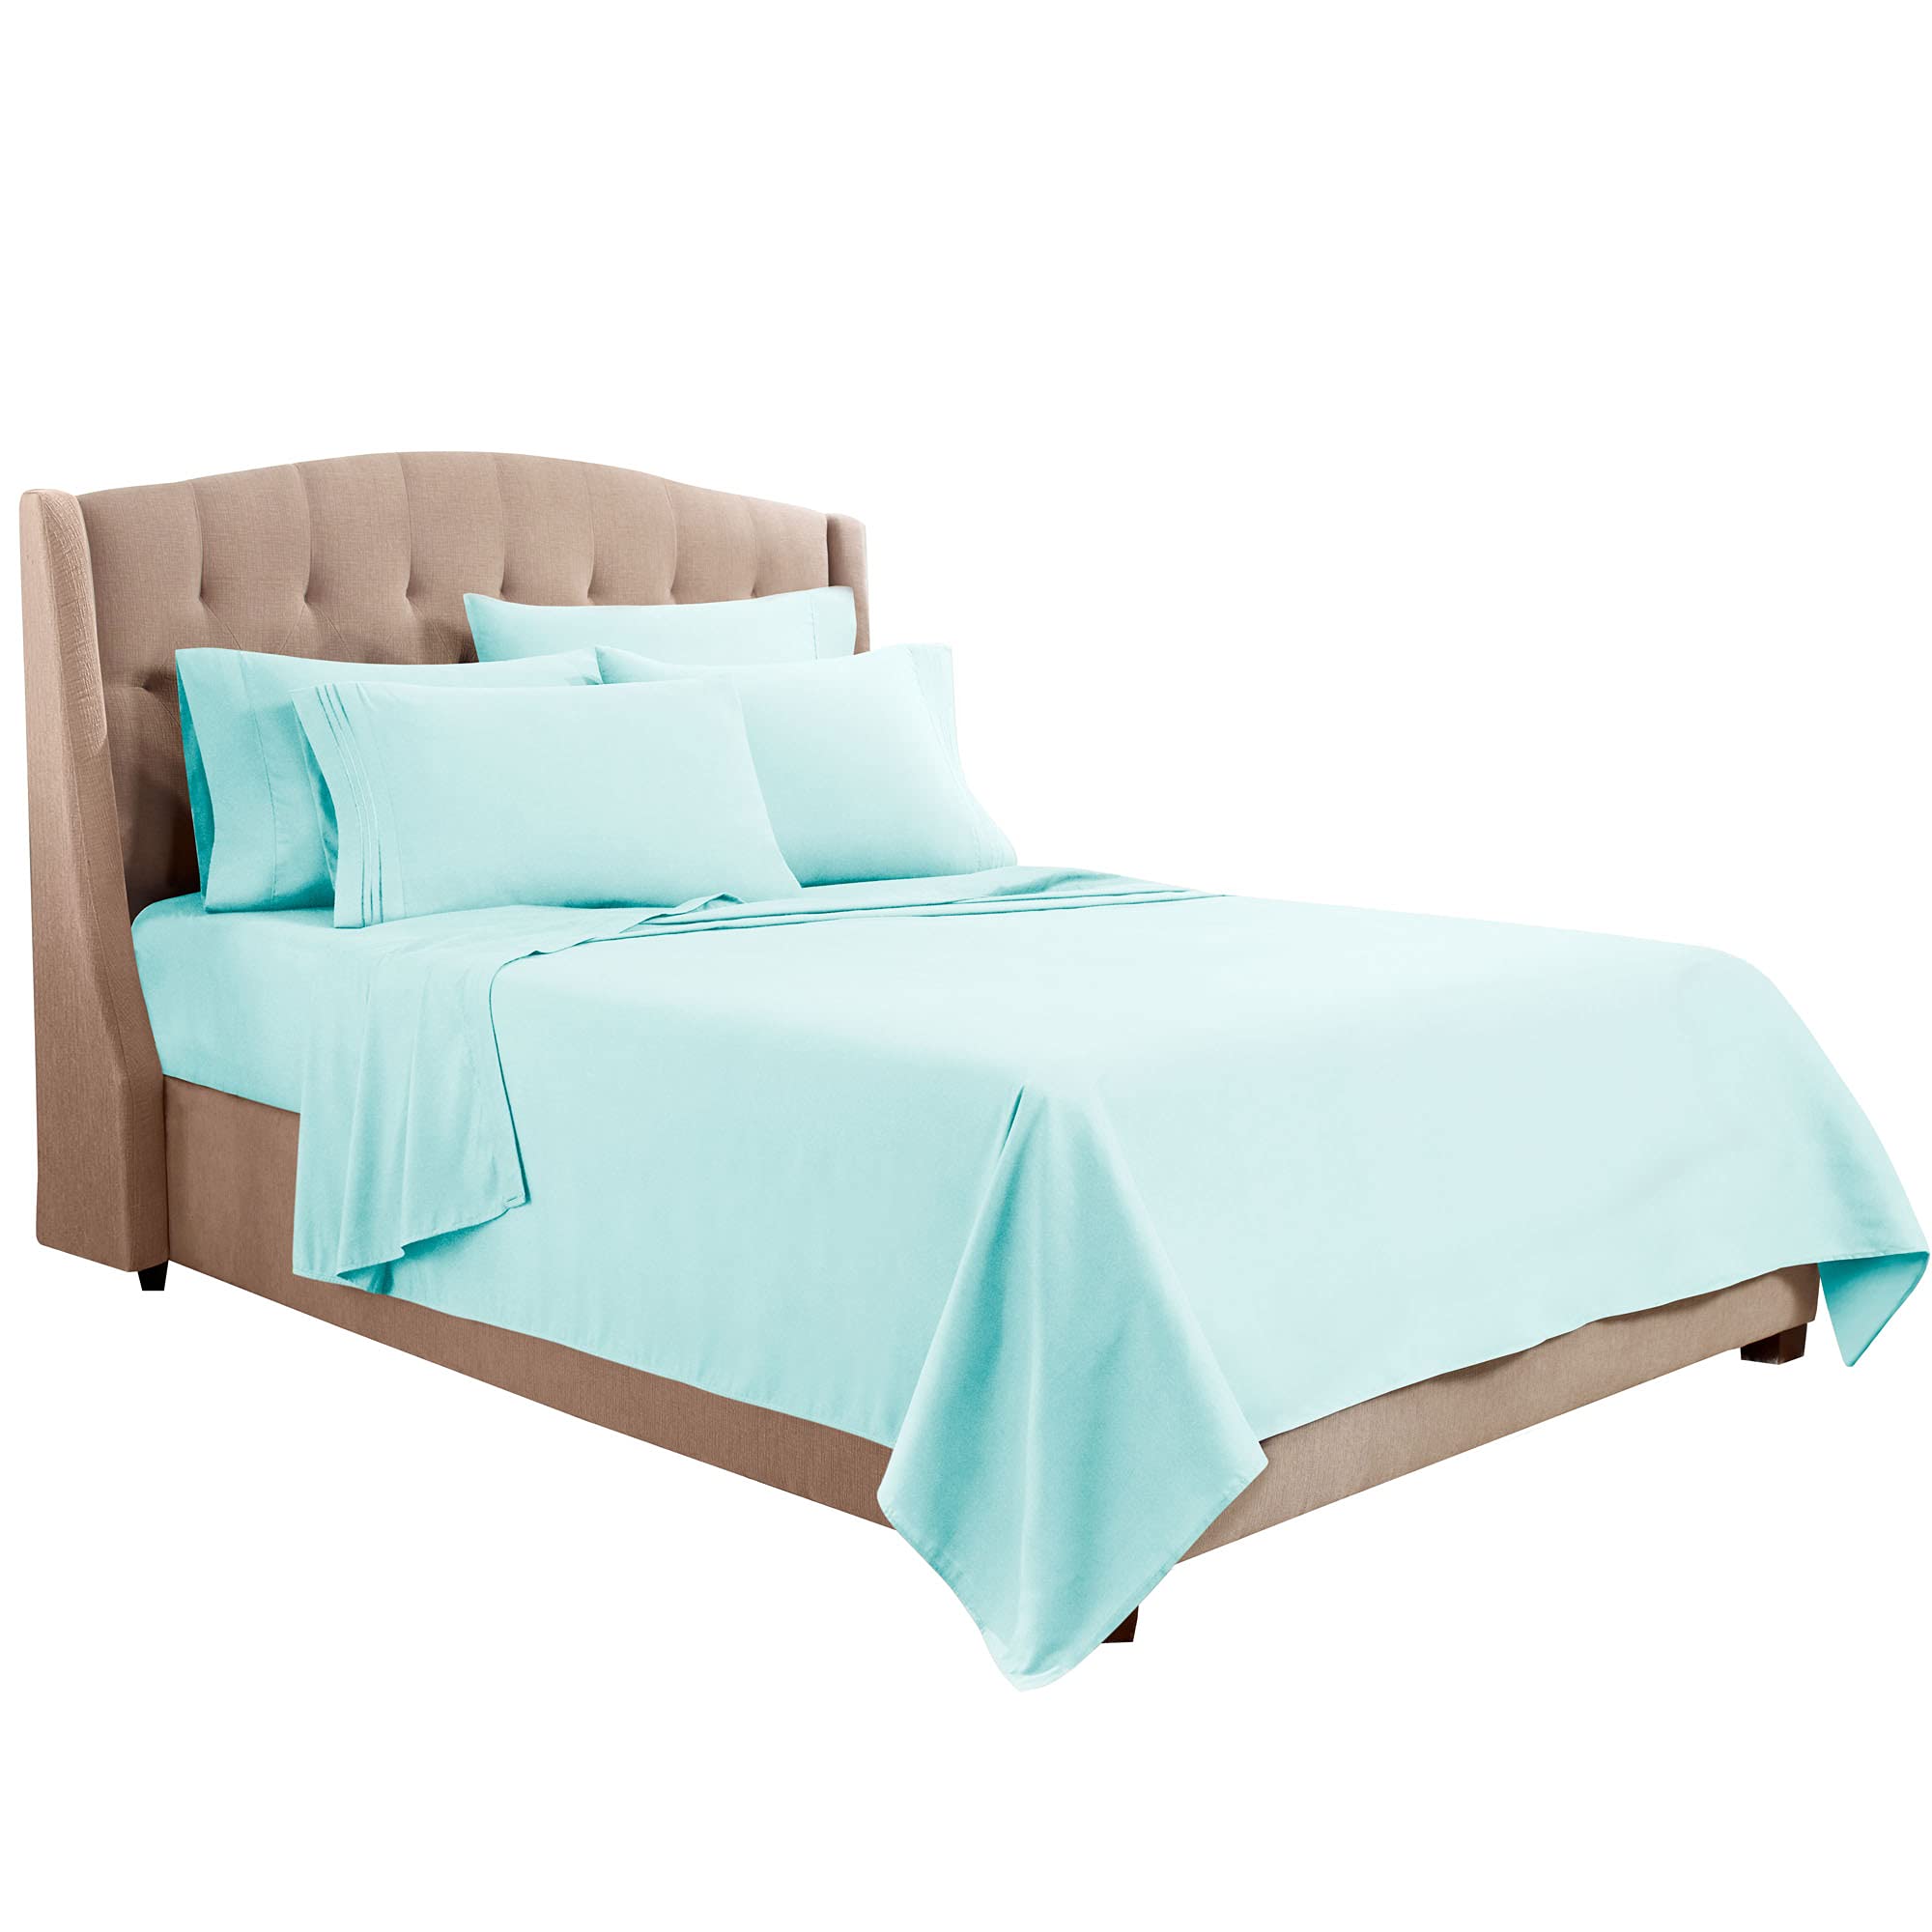 Clara Clark Bed Sheet Set with Extra Set Pillowcases, Premier 1800 Collection, Wrinkle, Fade & Stain Resistant, California King, Aqua Light Blue